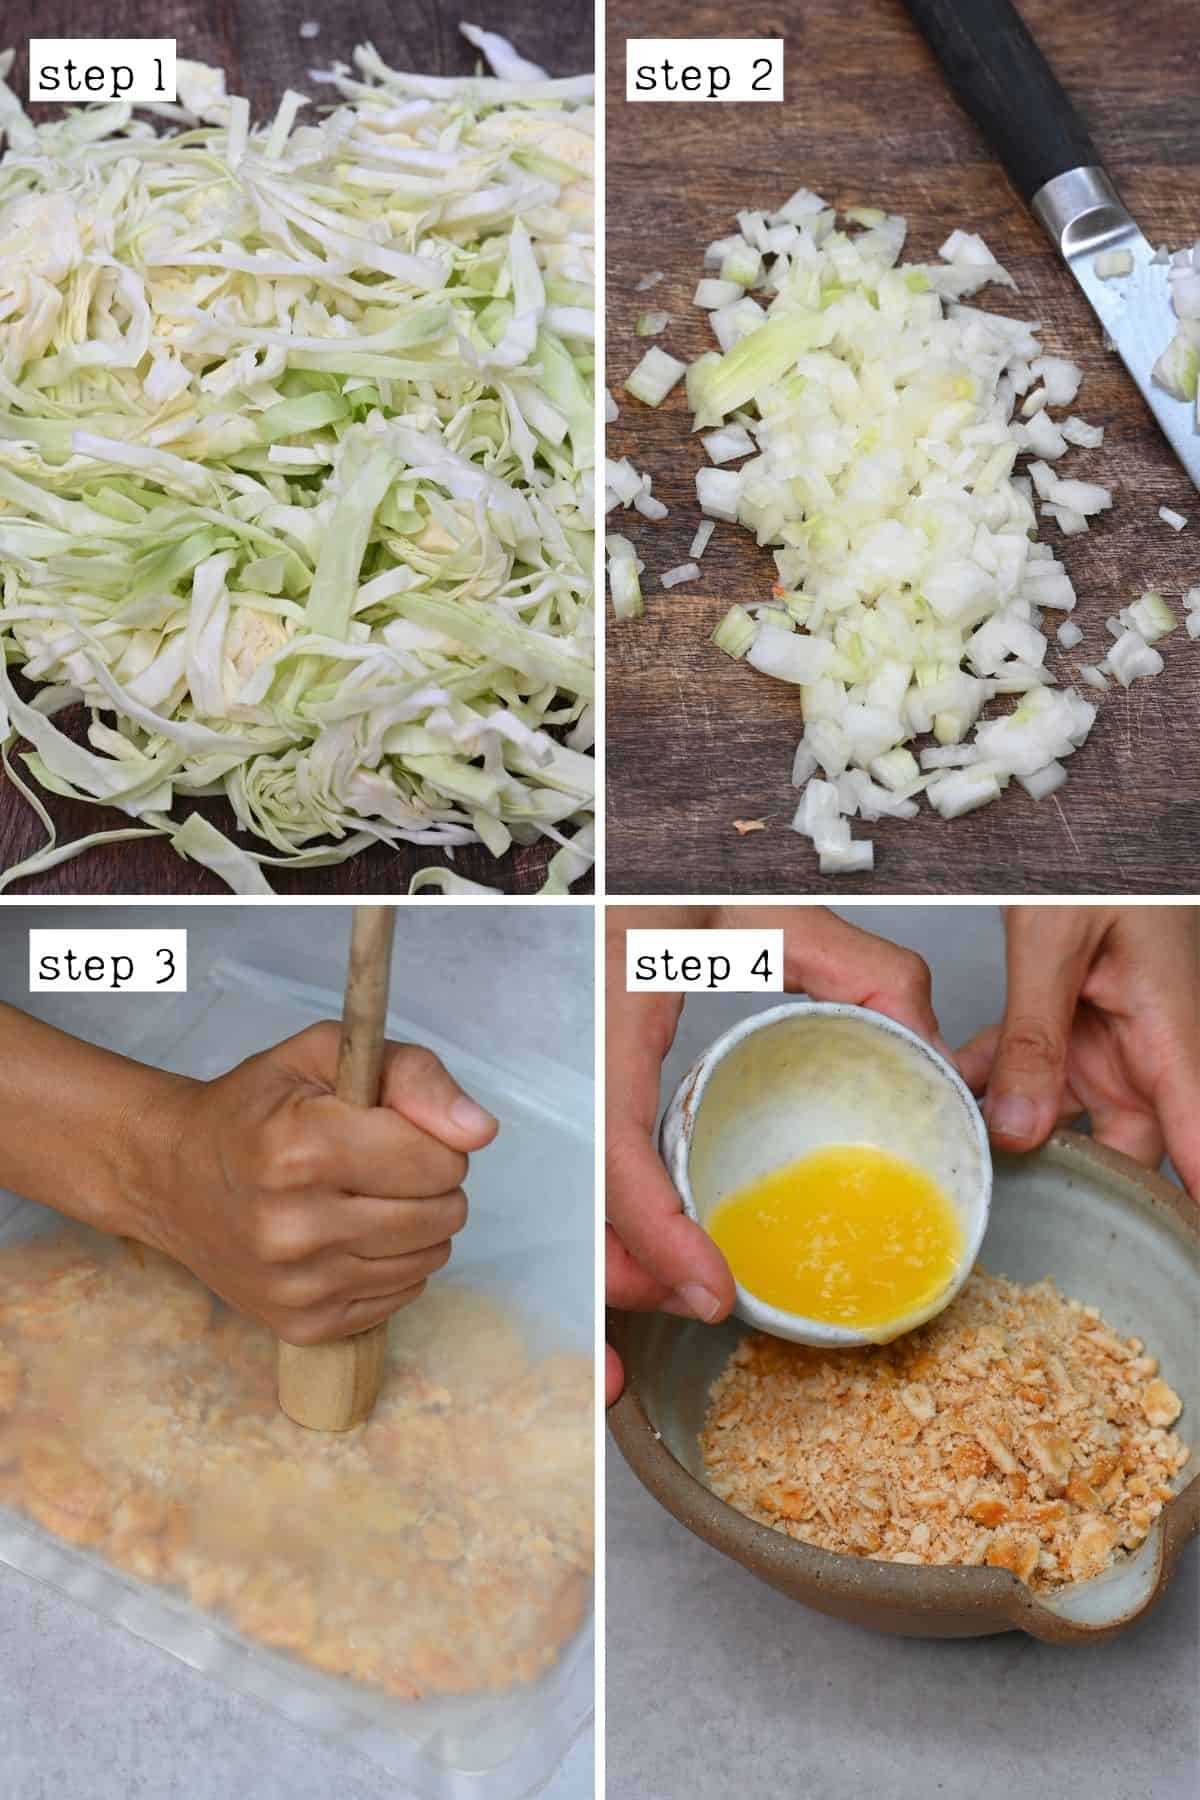 Steps for preparing ingredients for casserole